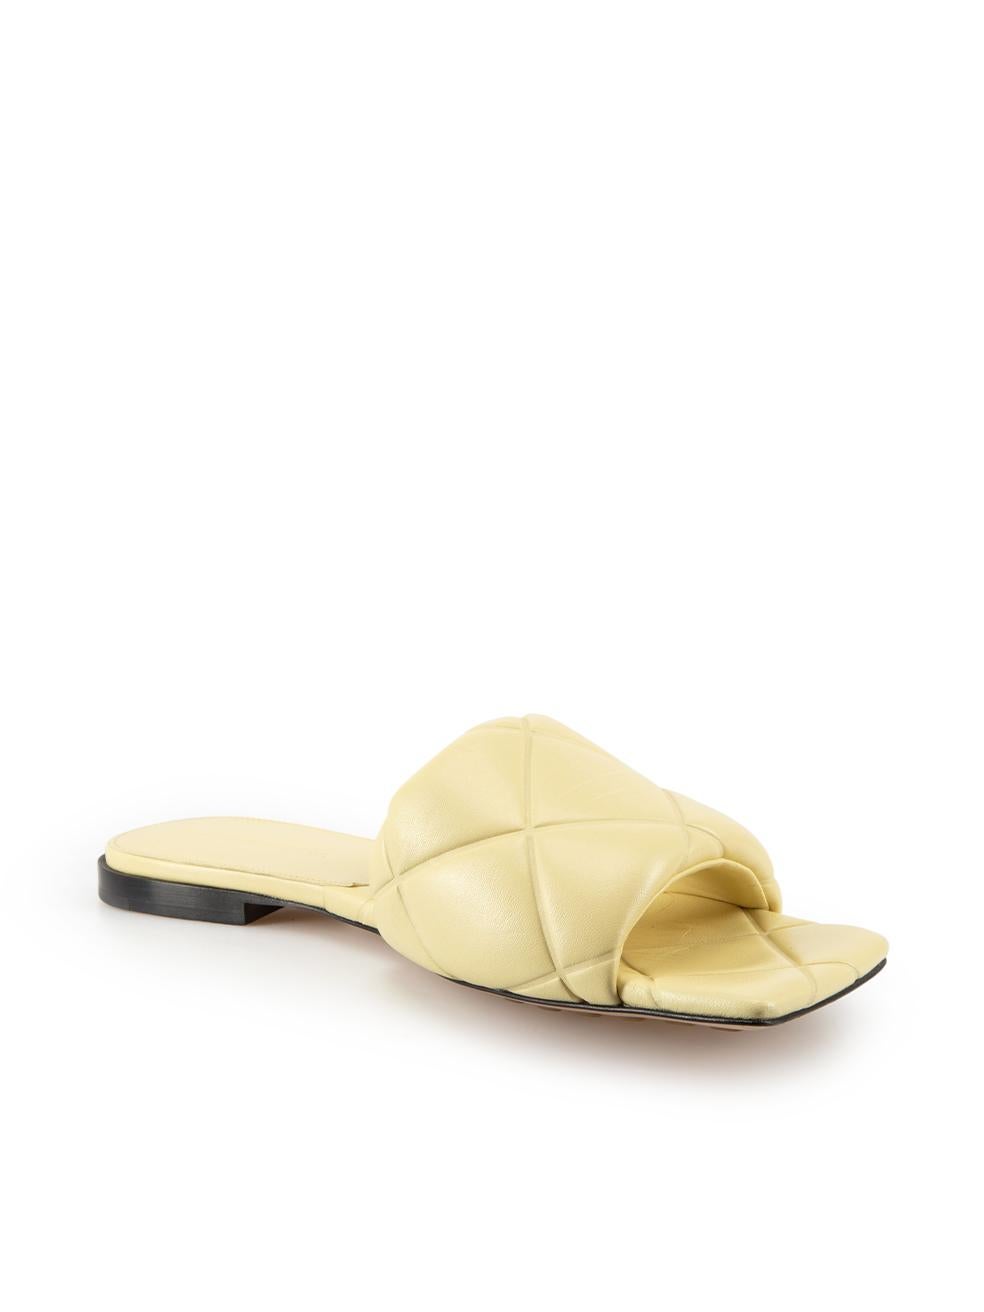 CONDITION is Very good. Hardly any visible wear to sandals is evident despite minimal creasing and light marking of outsole on this used Bottega Veneta designer resale item.



Details


Canary yellow

Leather

Slide sandals

Quilted and